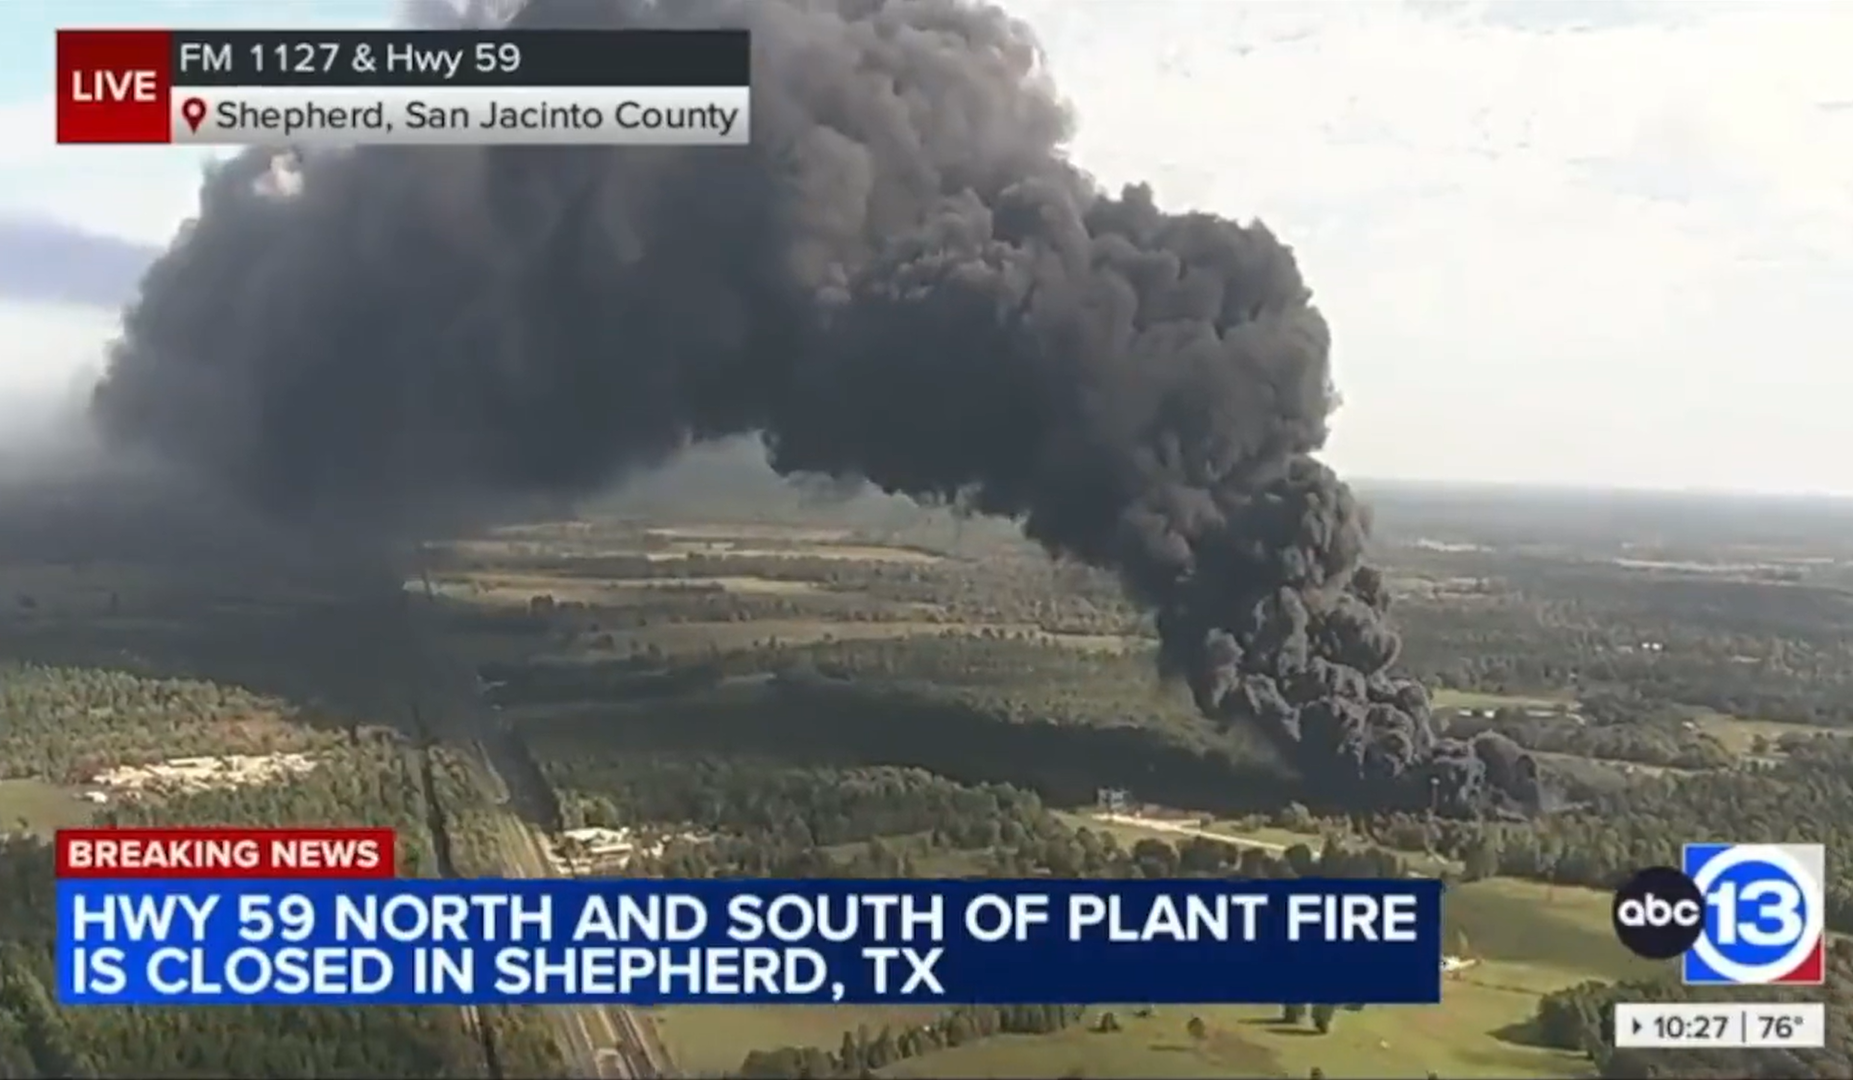 Chemical Plant Explosion in Shepherd, Texas, Prompts Shelter in Place